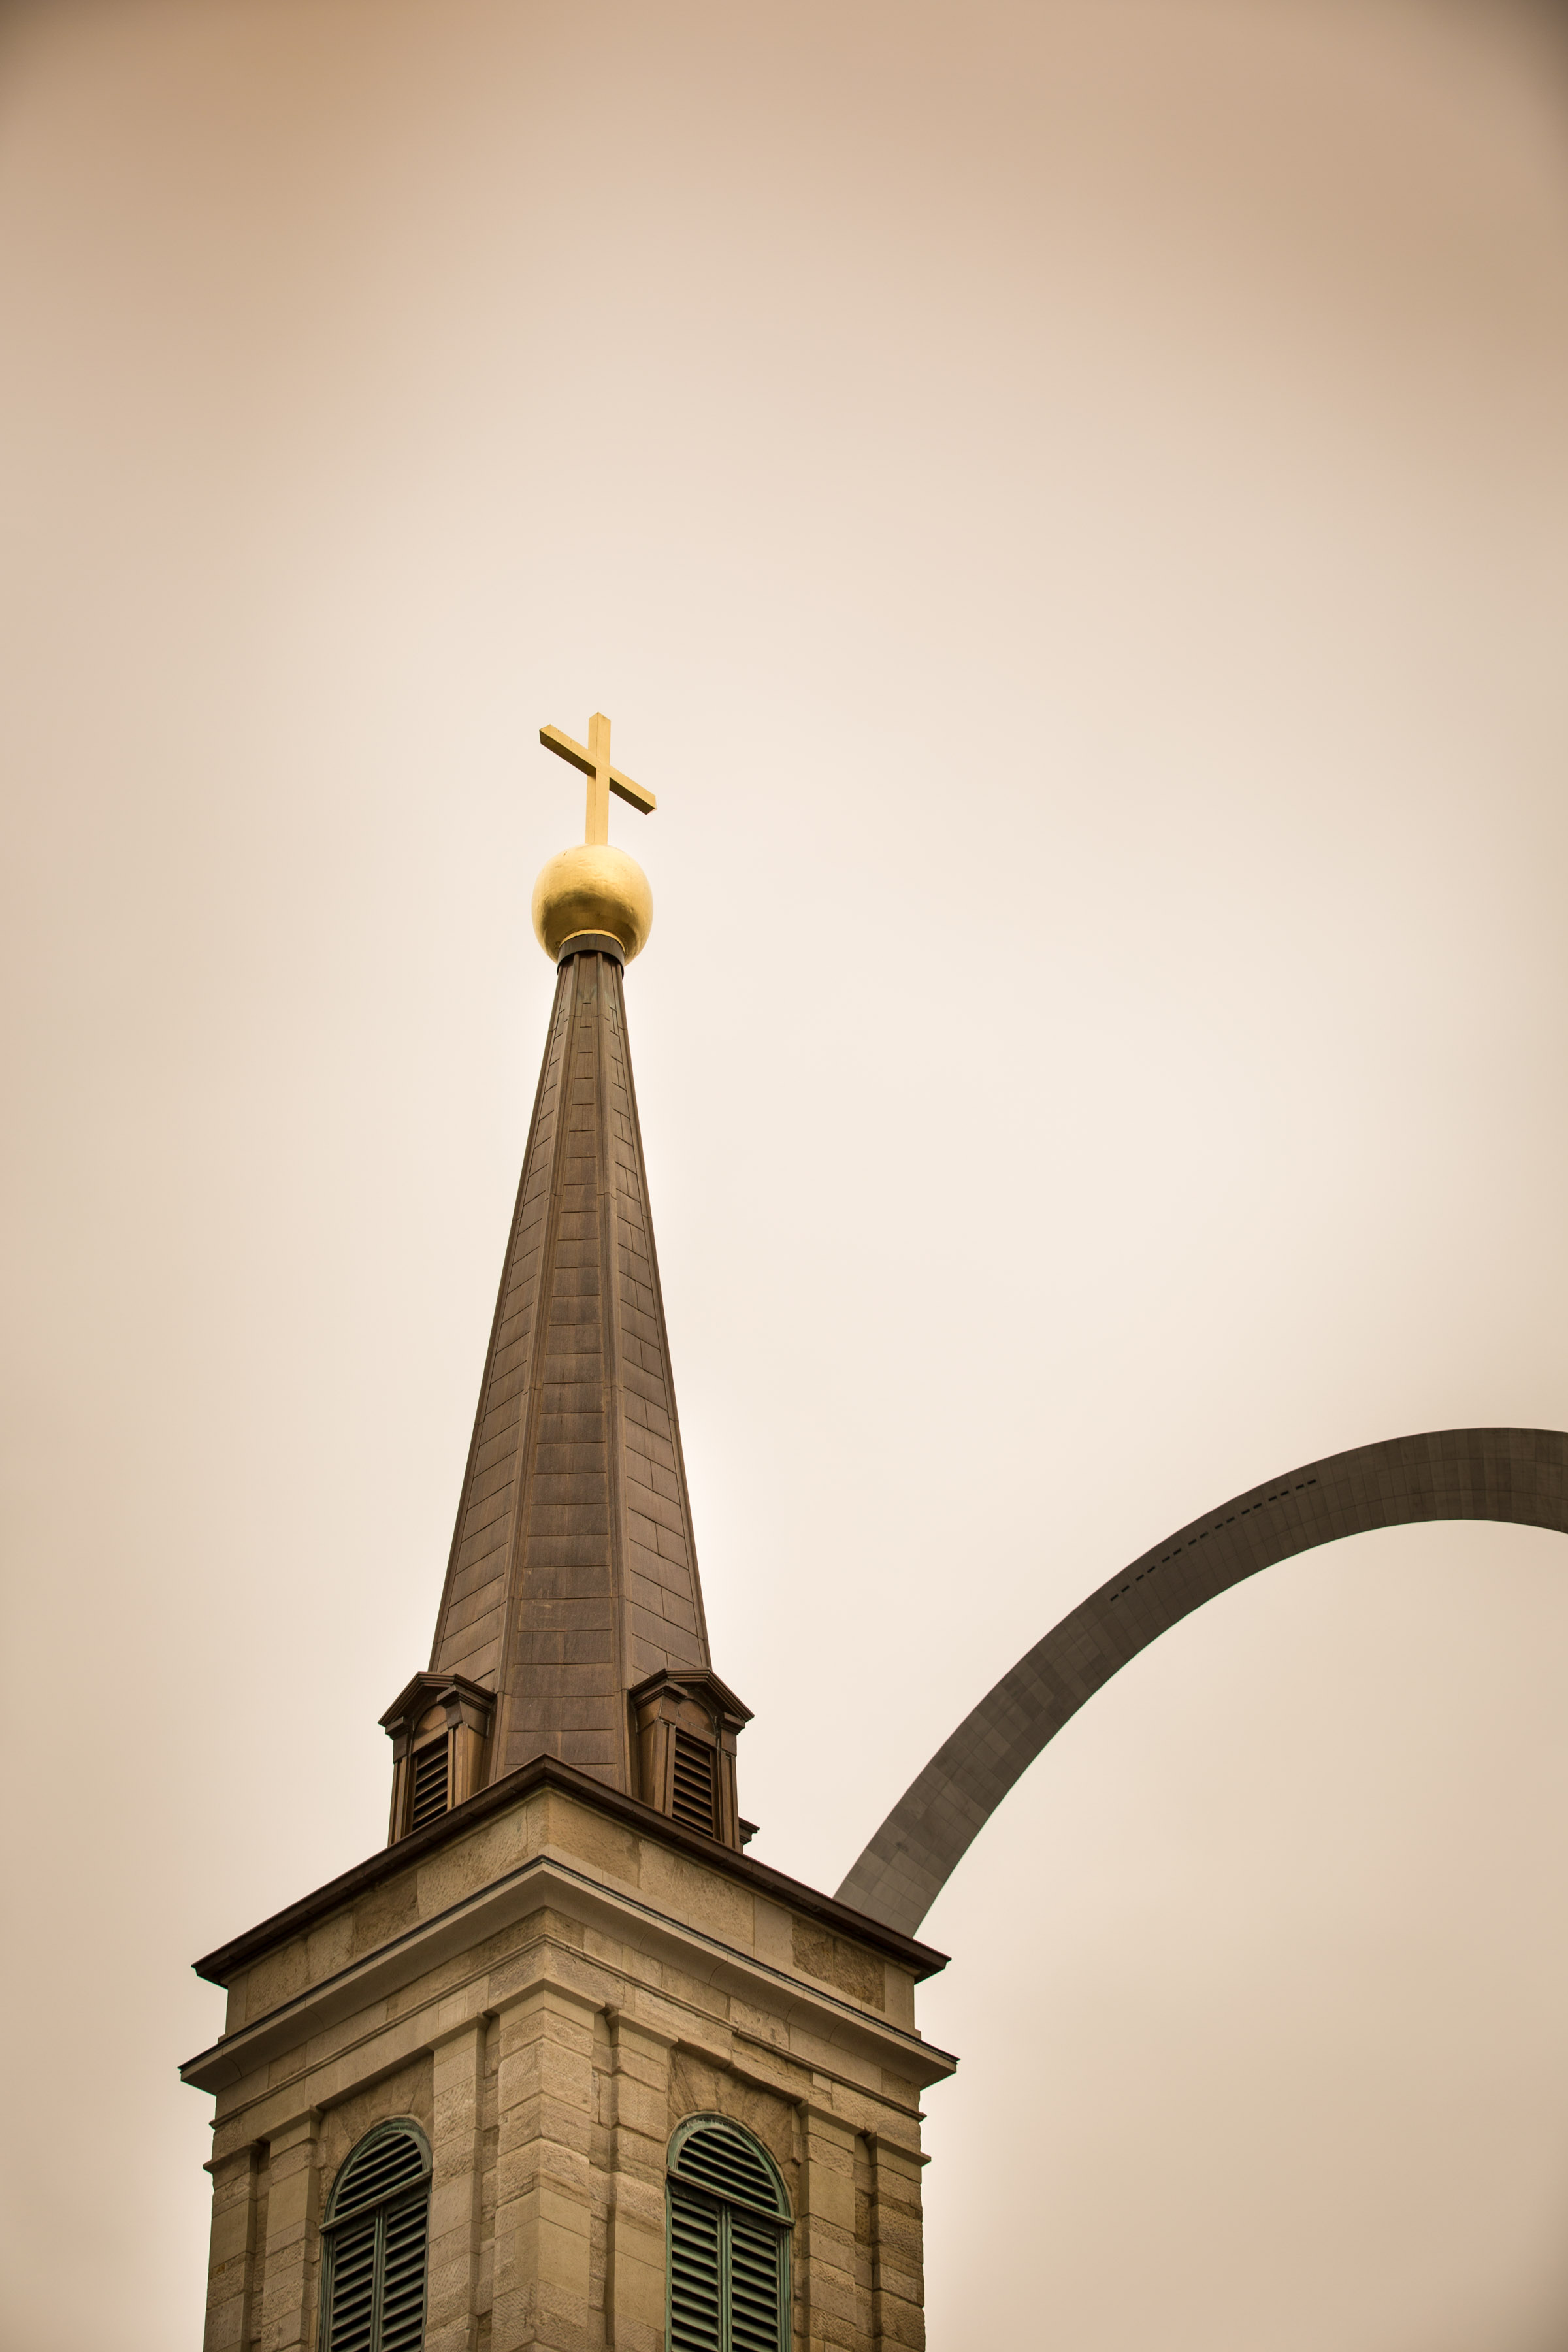 About the Archdiocese | Archdiocese of St Louis